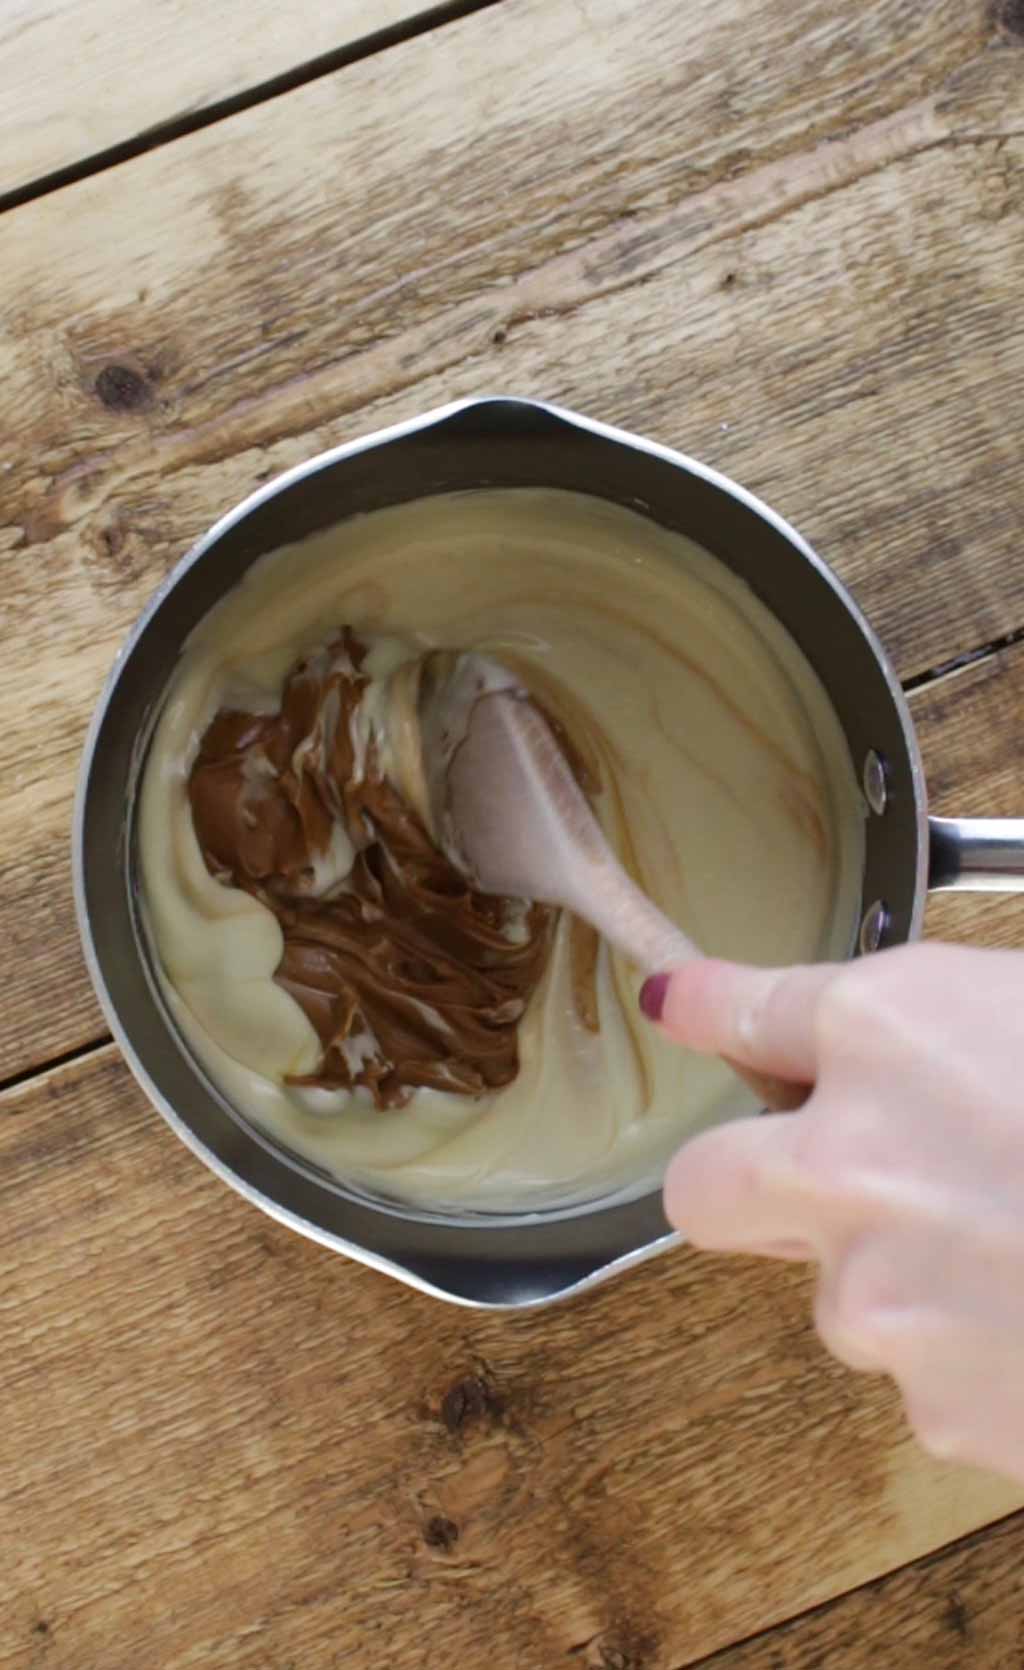 Mixing biscoff Spread Into Melted White Chocolate